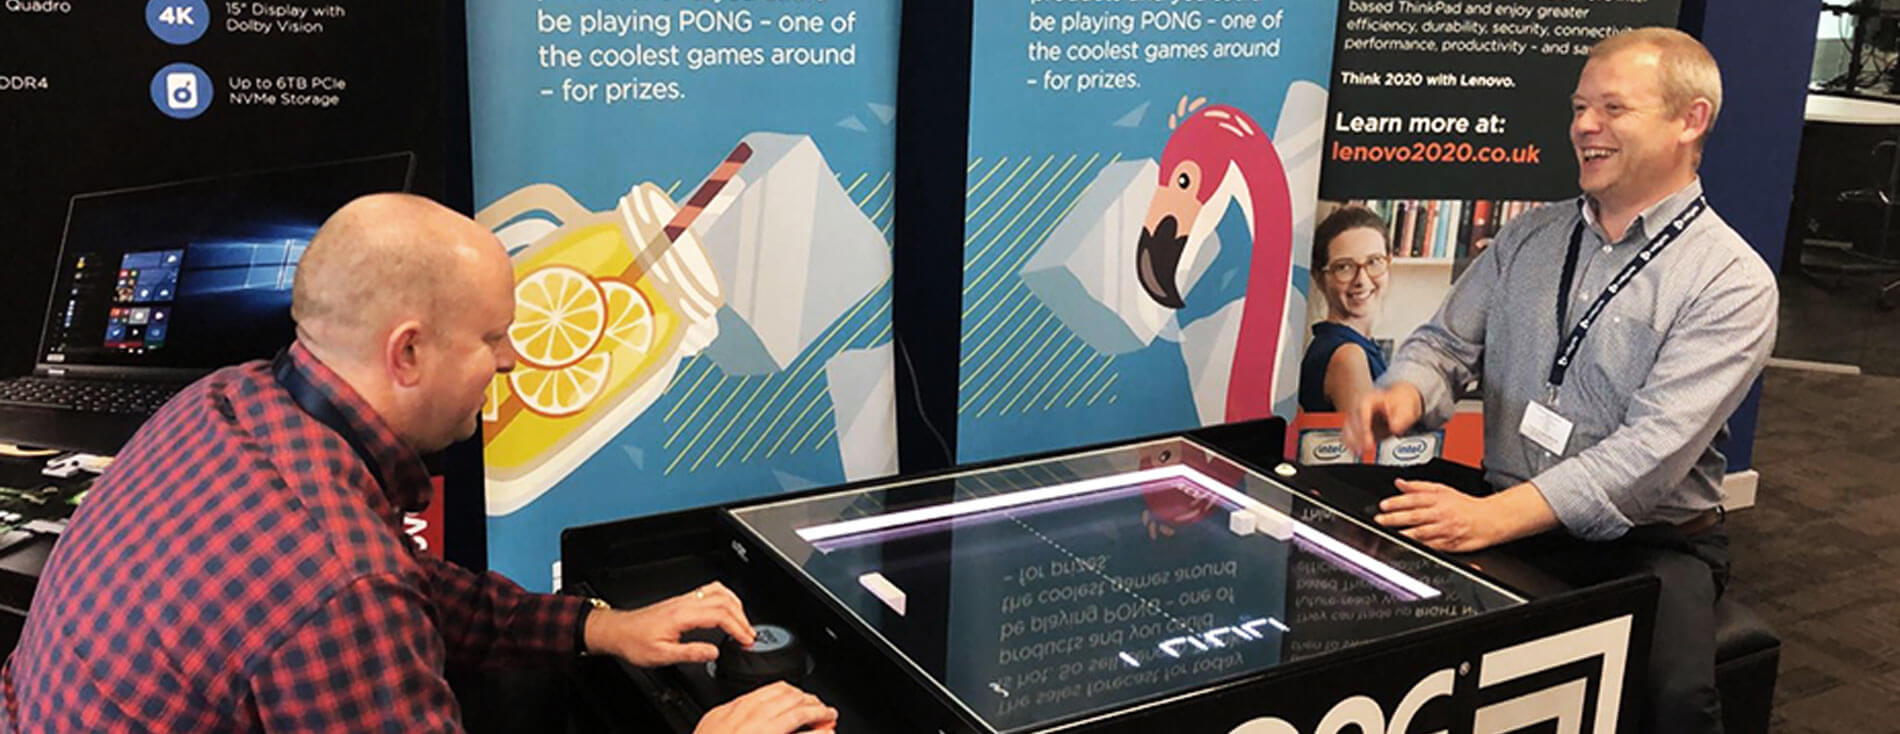 atari pong arcade table at special office event